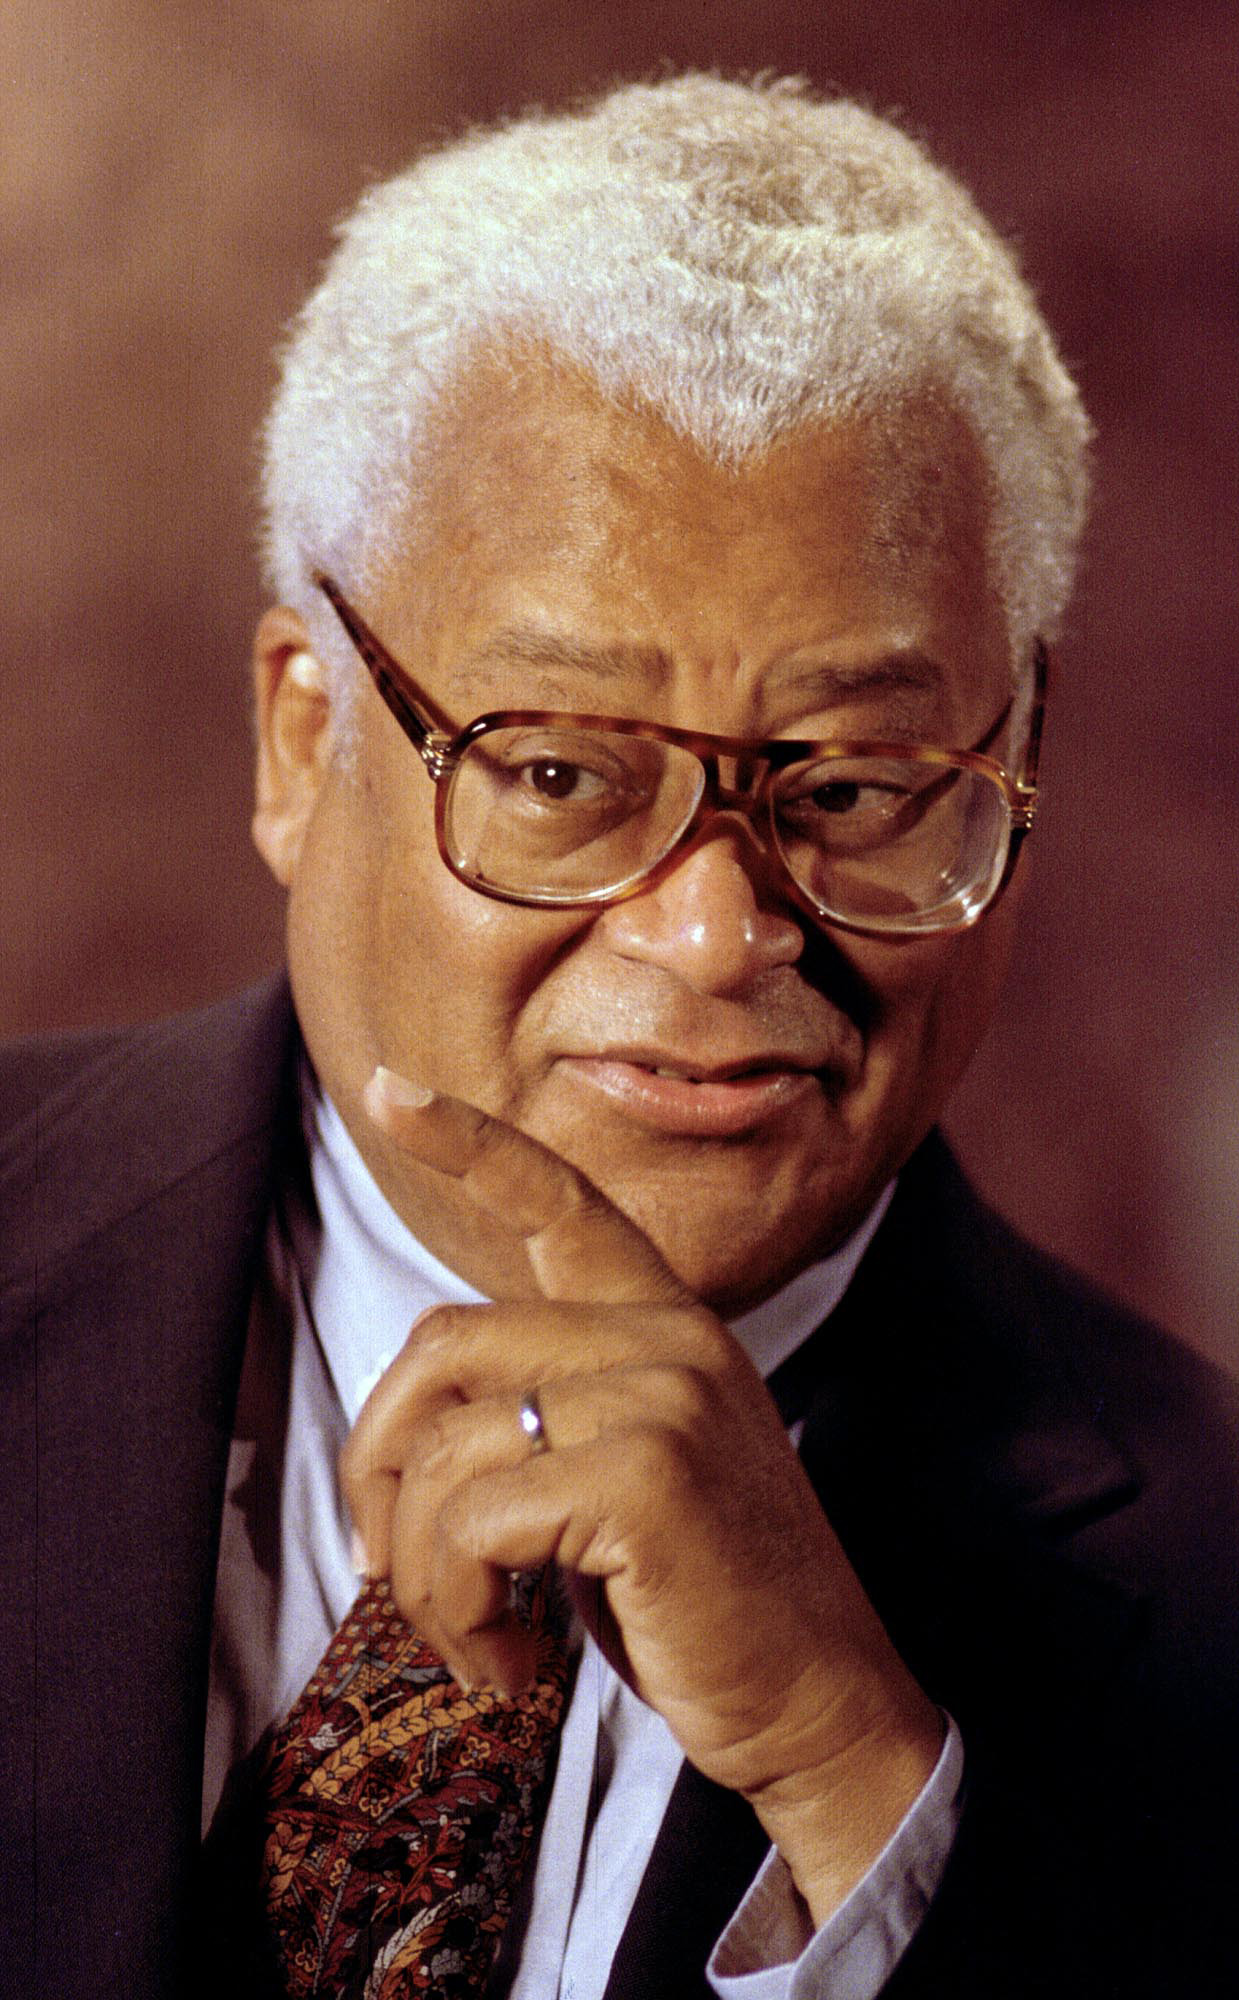 The Rev. James Lawson. Photo by Mike DuBose, UMNS.